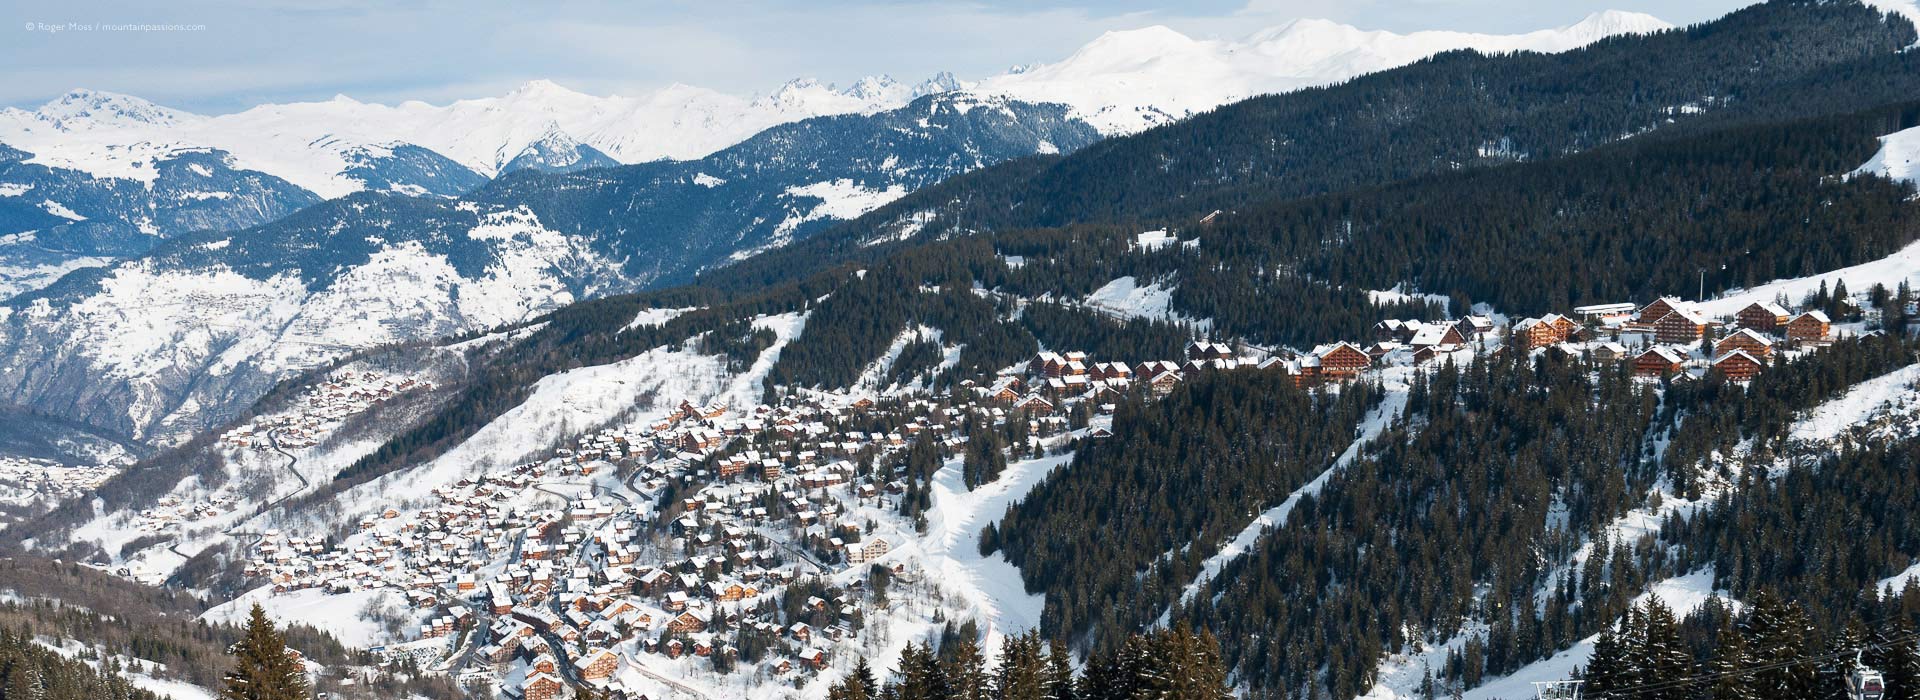 View from mountainside of Meribel ski village, in the French Alps.